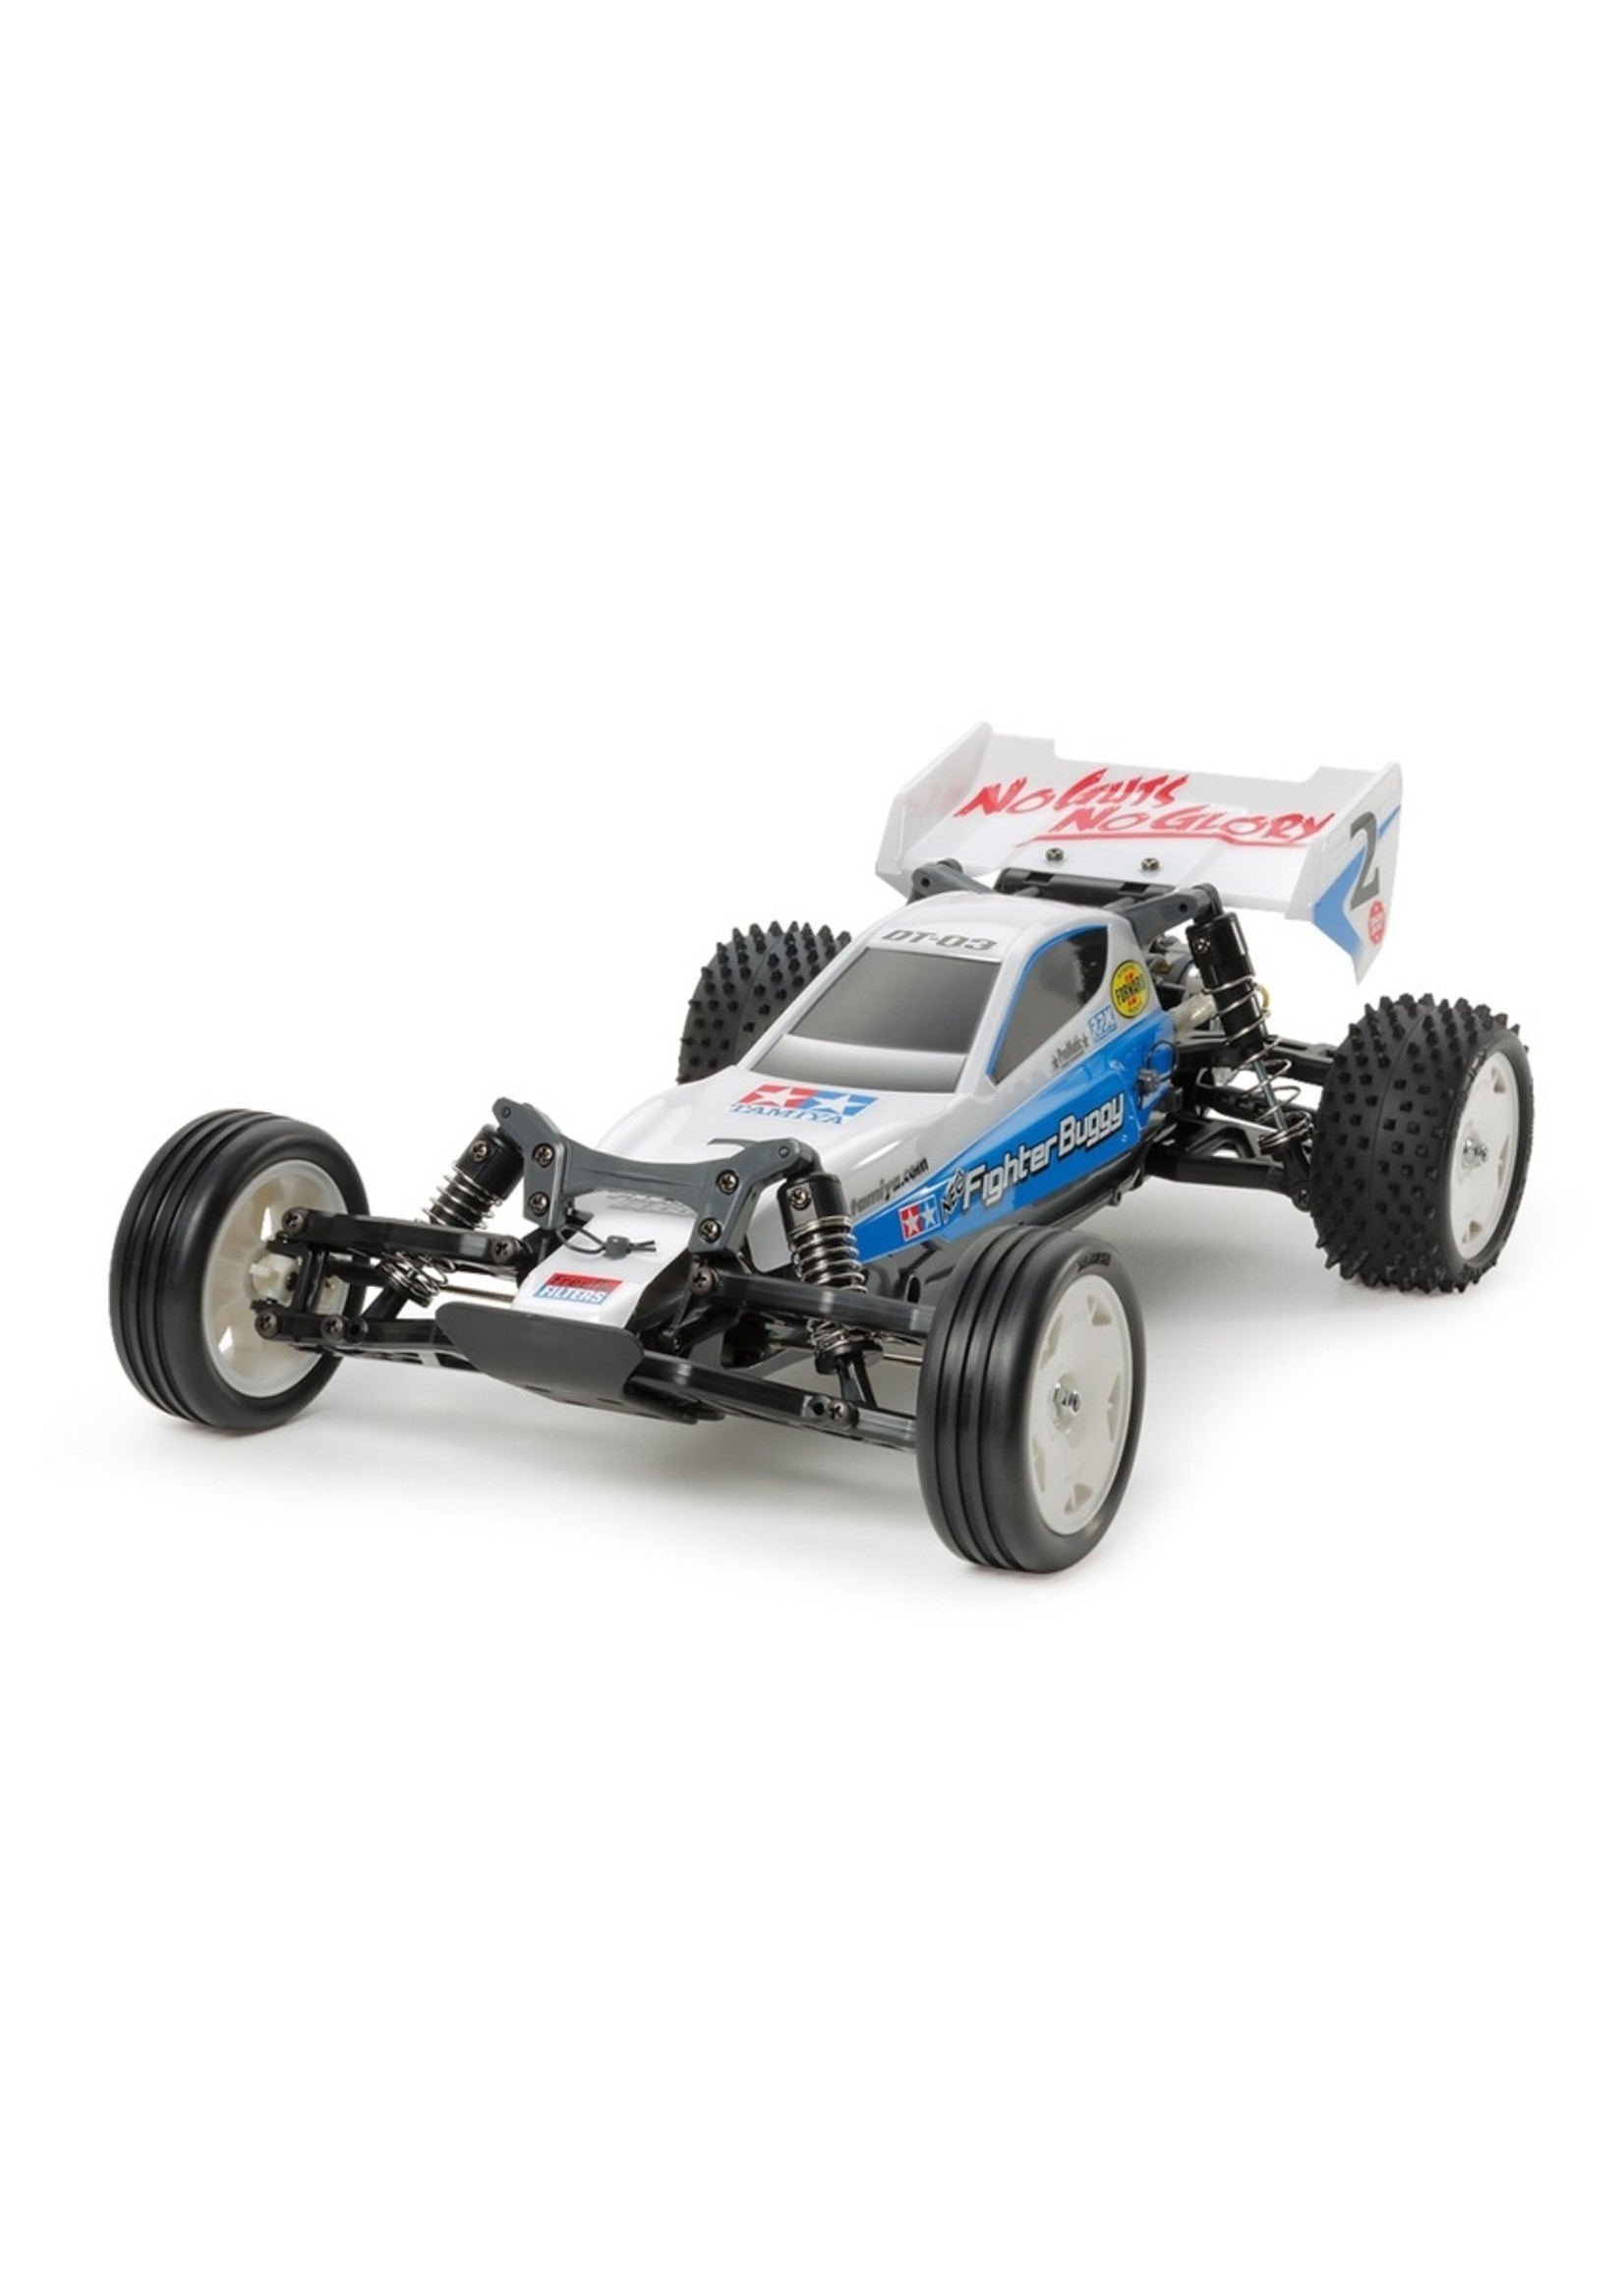 Tamiya 1/10 Neo Fighter Buggy - DT-03 Chassis Kit